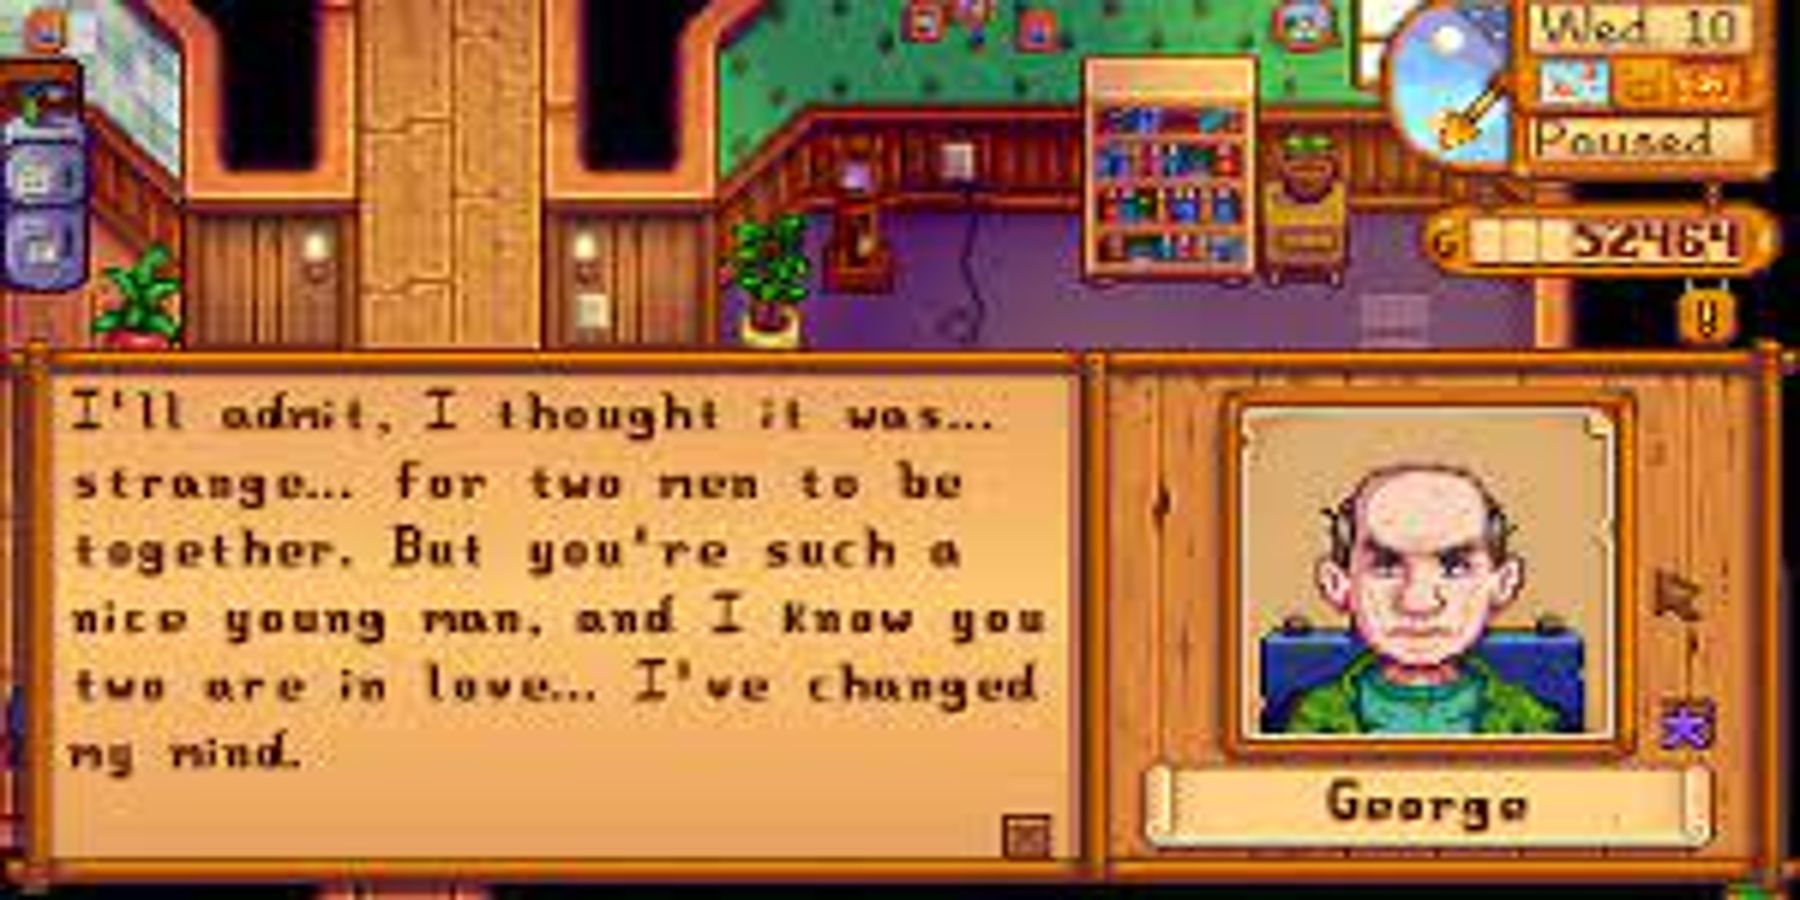 A screenshot of the NPC George accepting LGBTQIA+ relationships in Stardew valley.